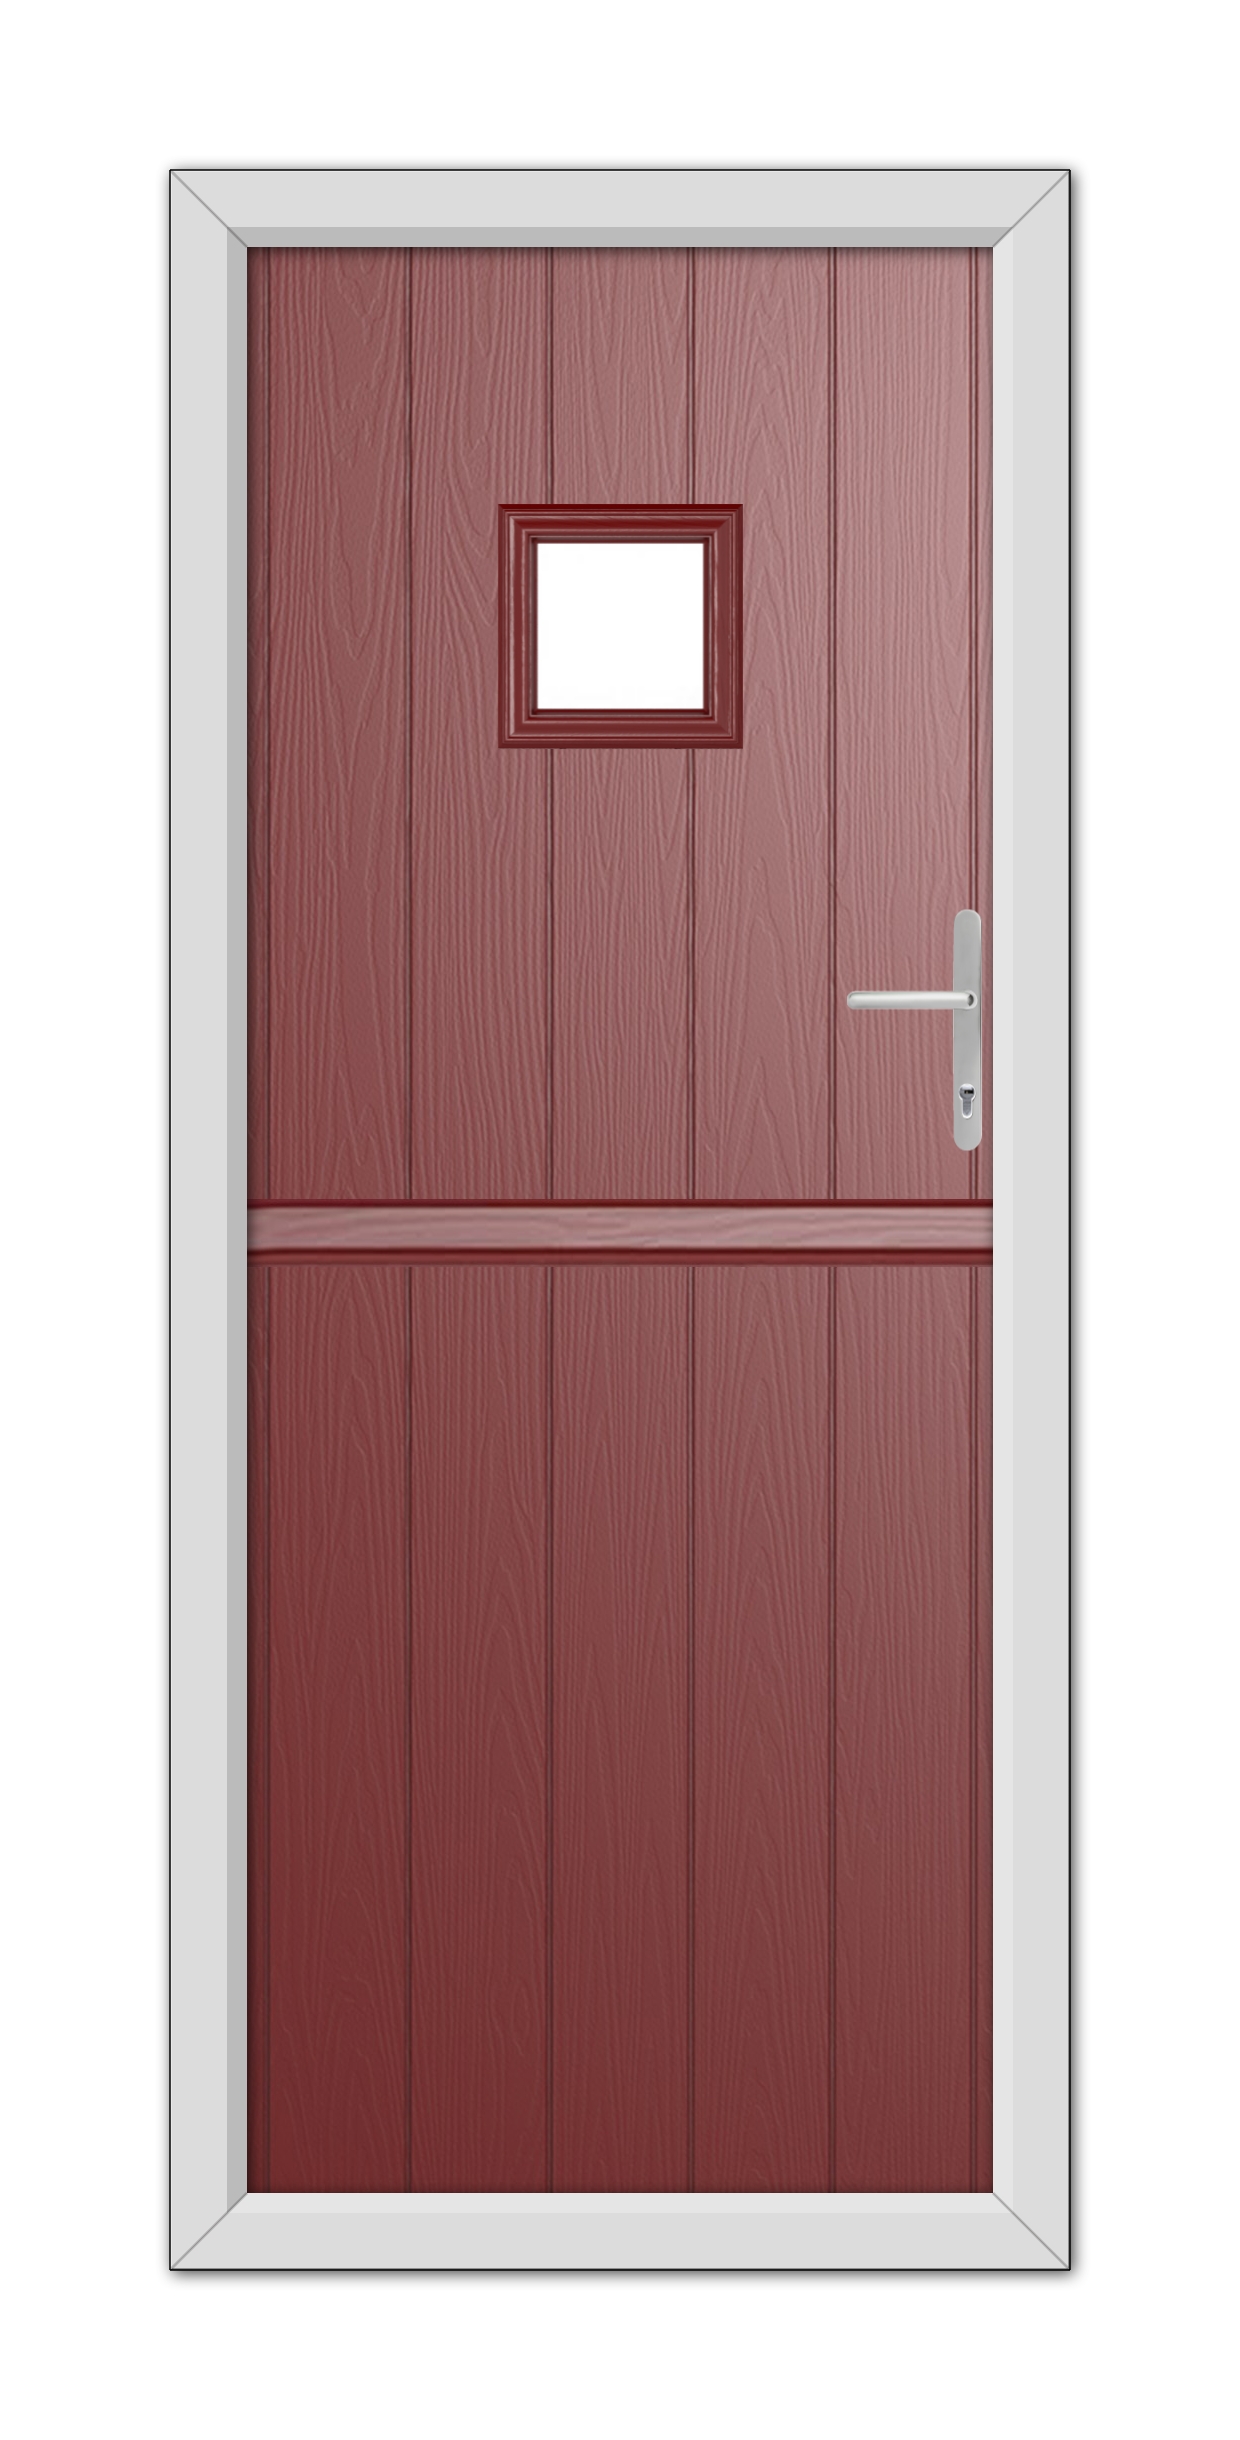 A modern Red Brampton Stable Composite Door 48mm Timber Core with a small rectangular window, set within a white frame, featuring a metallic handle on the right side.